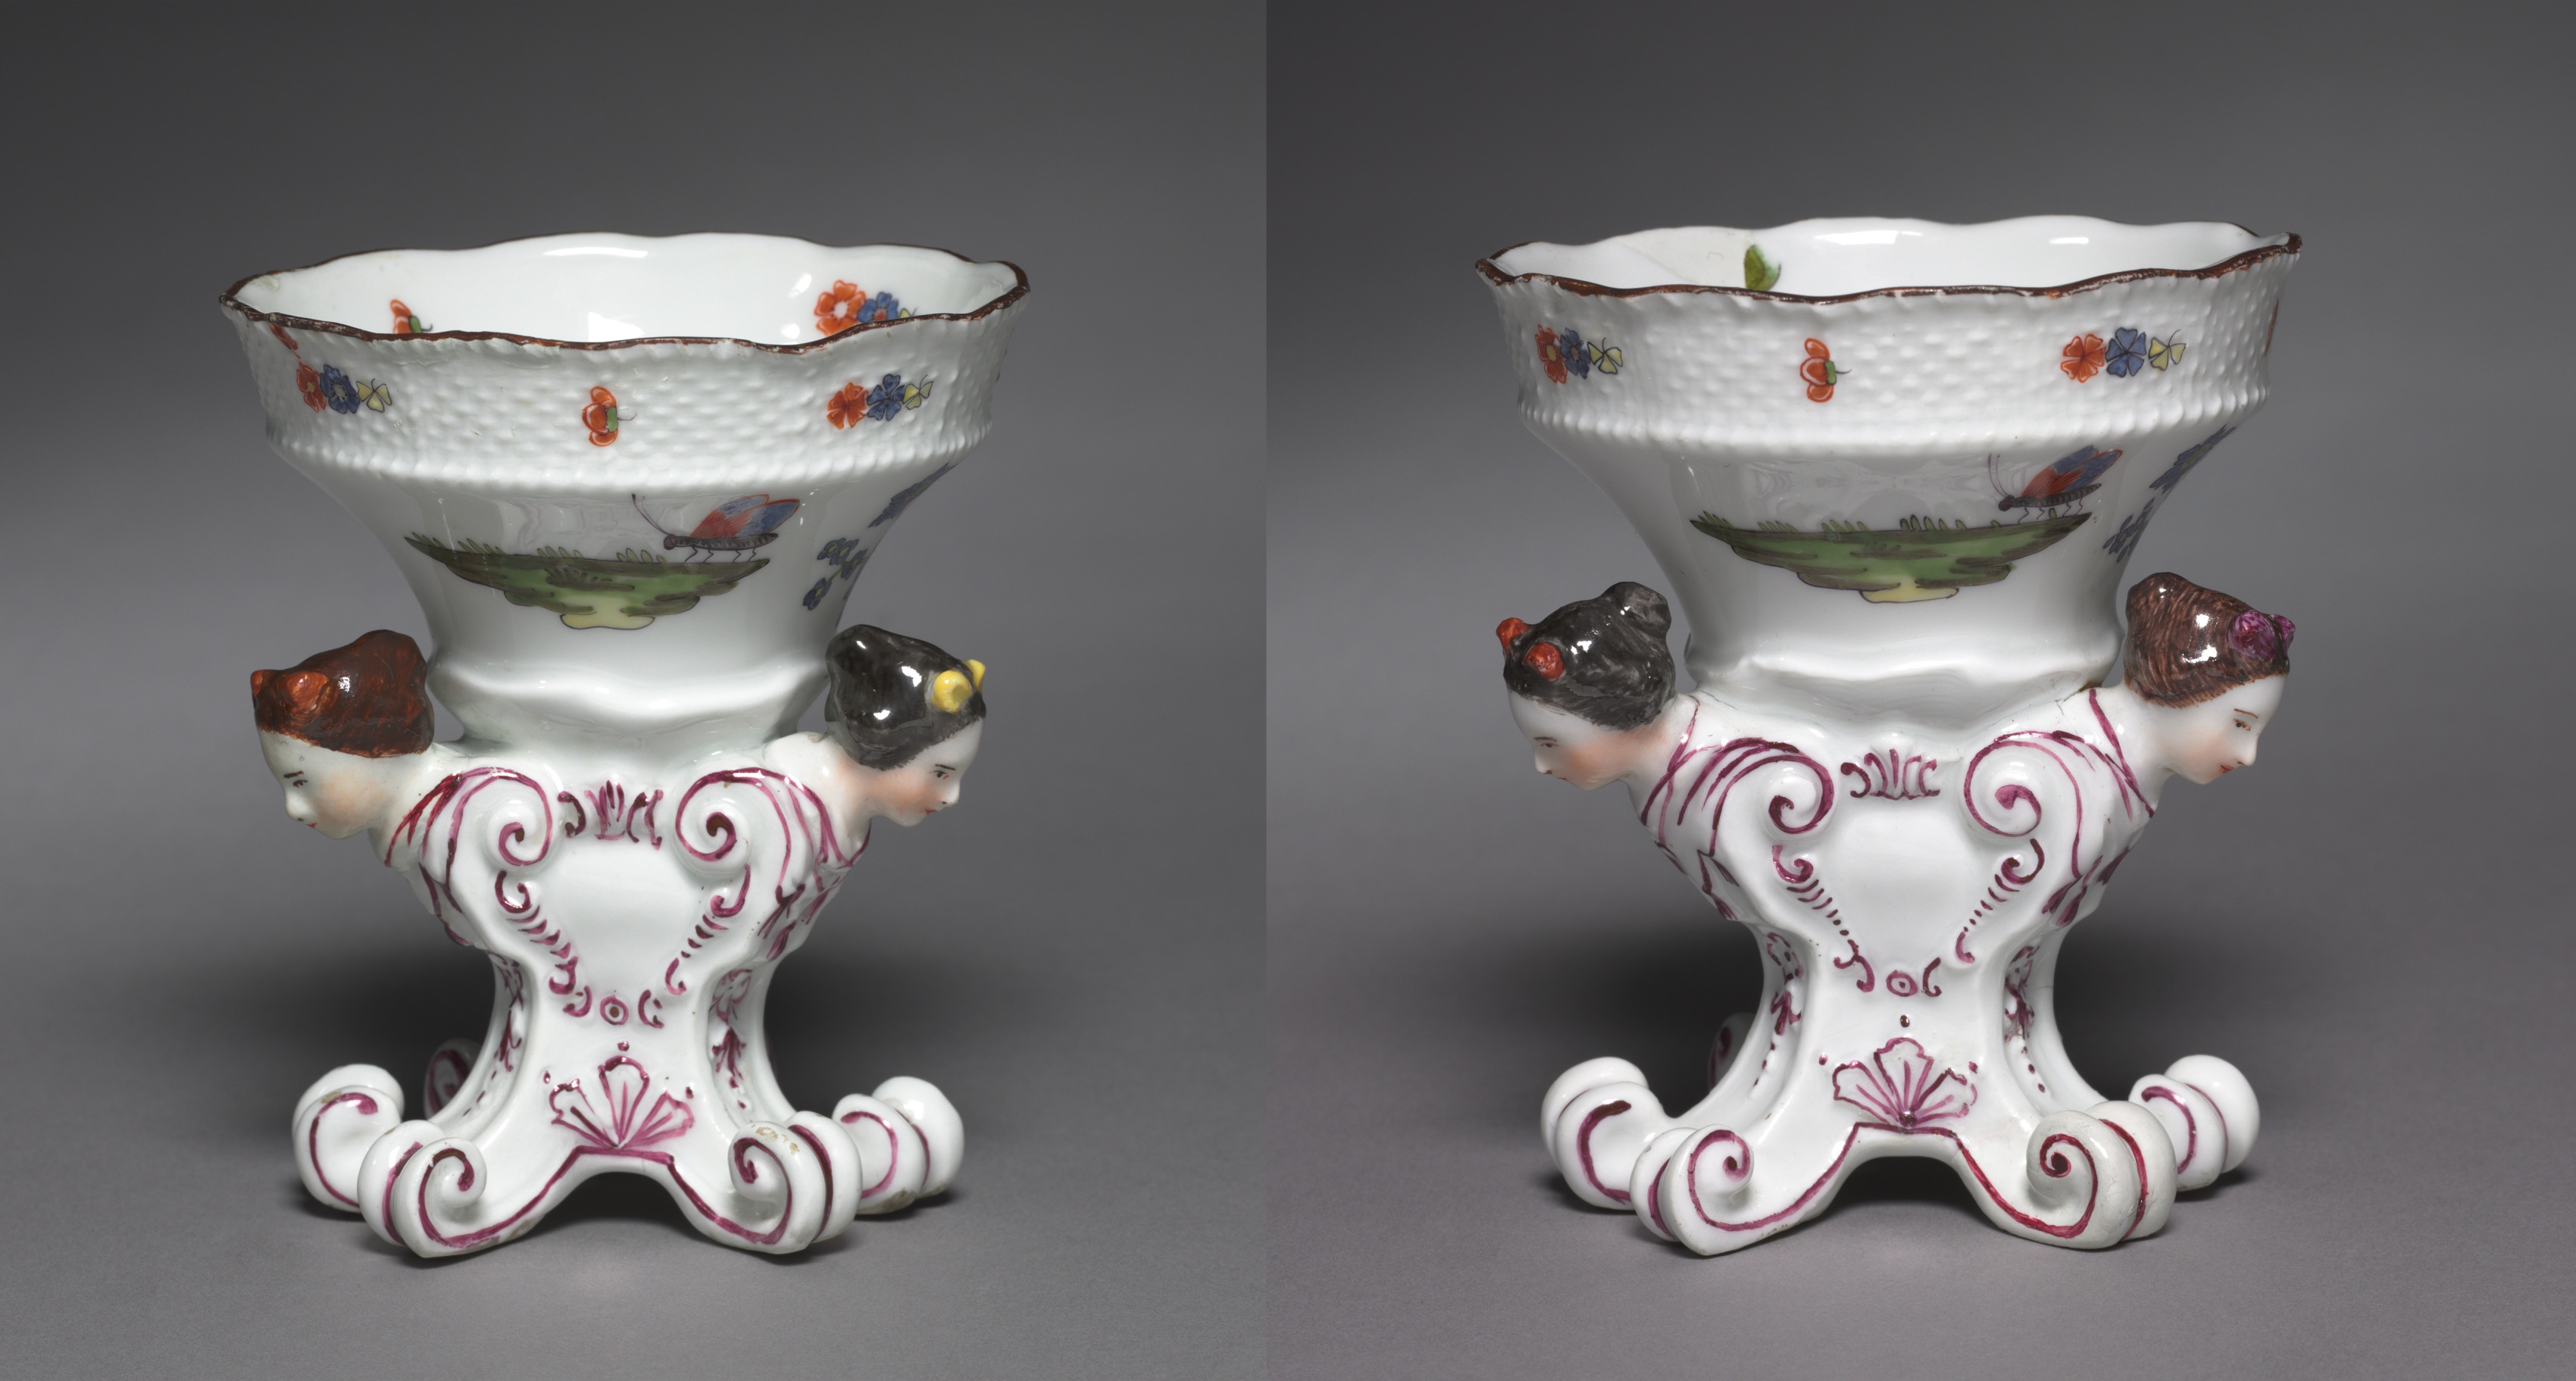 Pair of Salt Cellars from the Sulkowsky Service